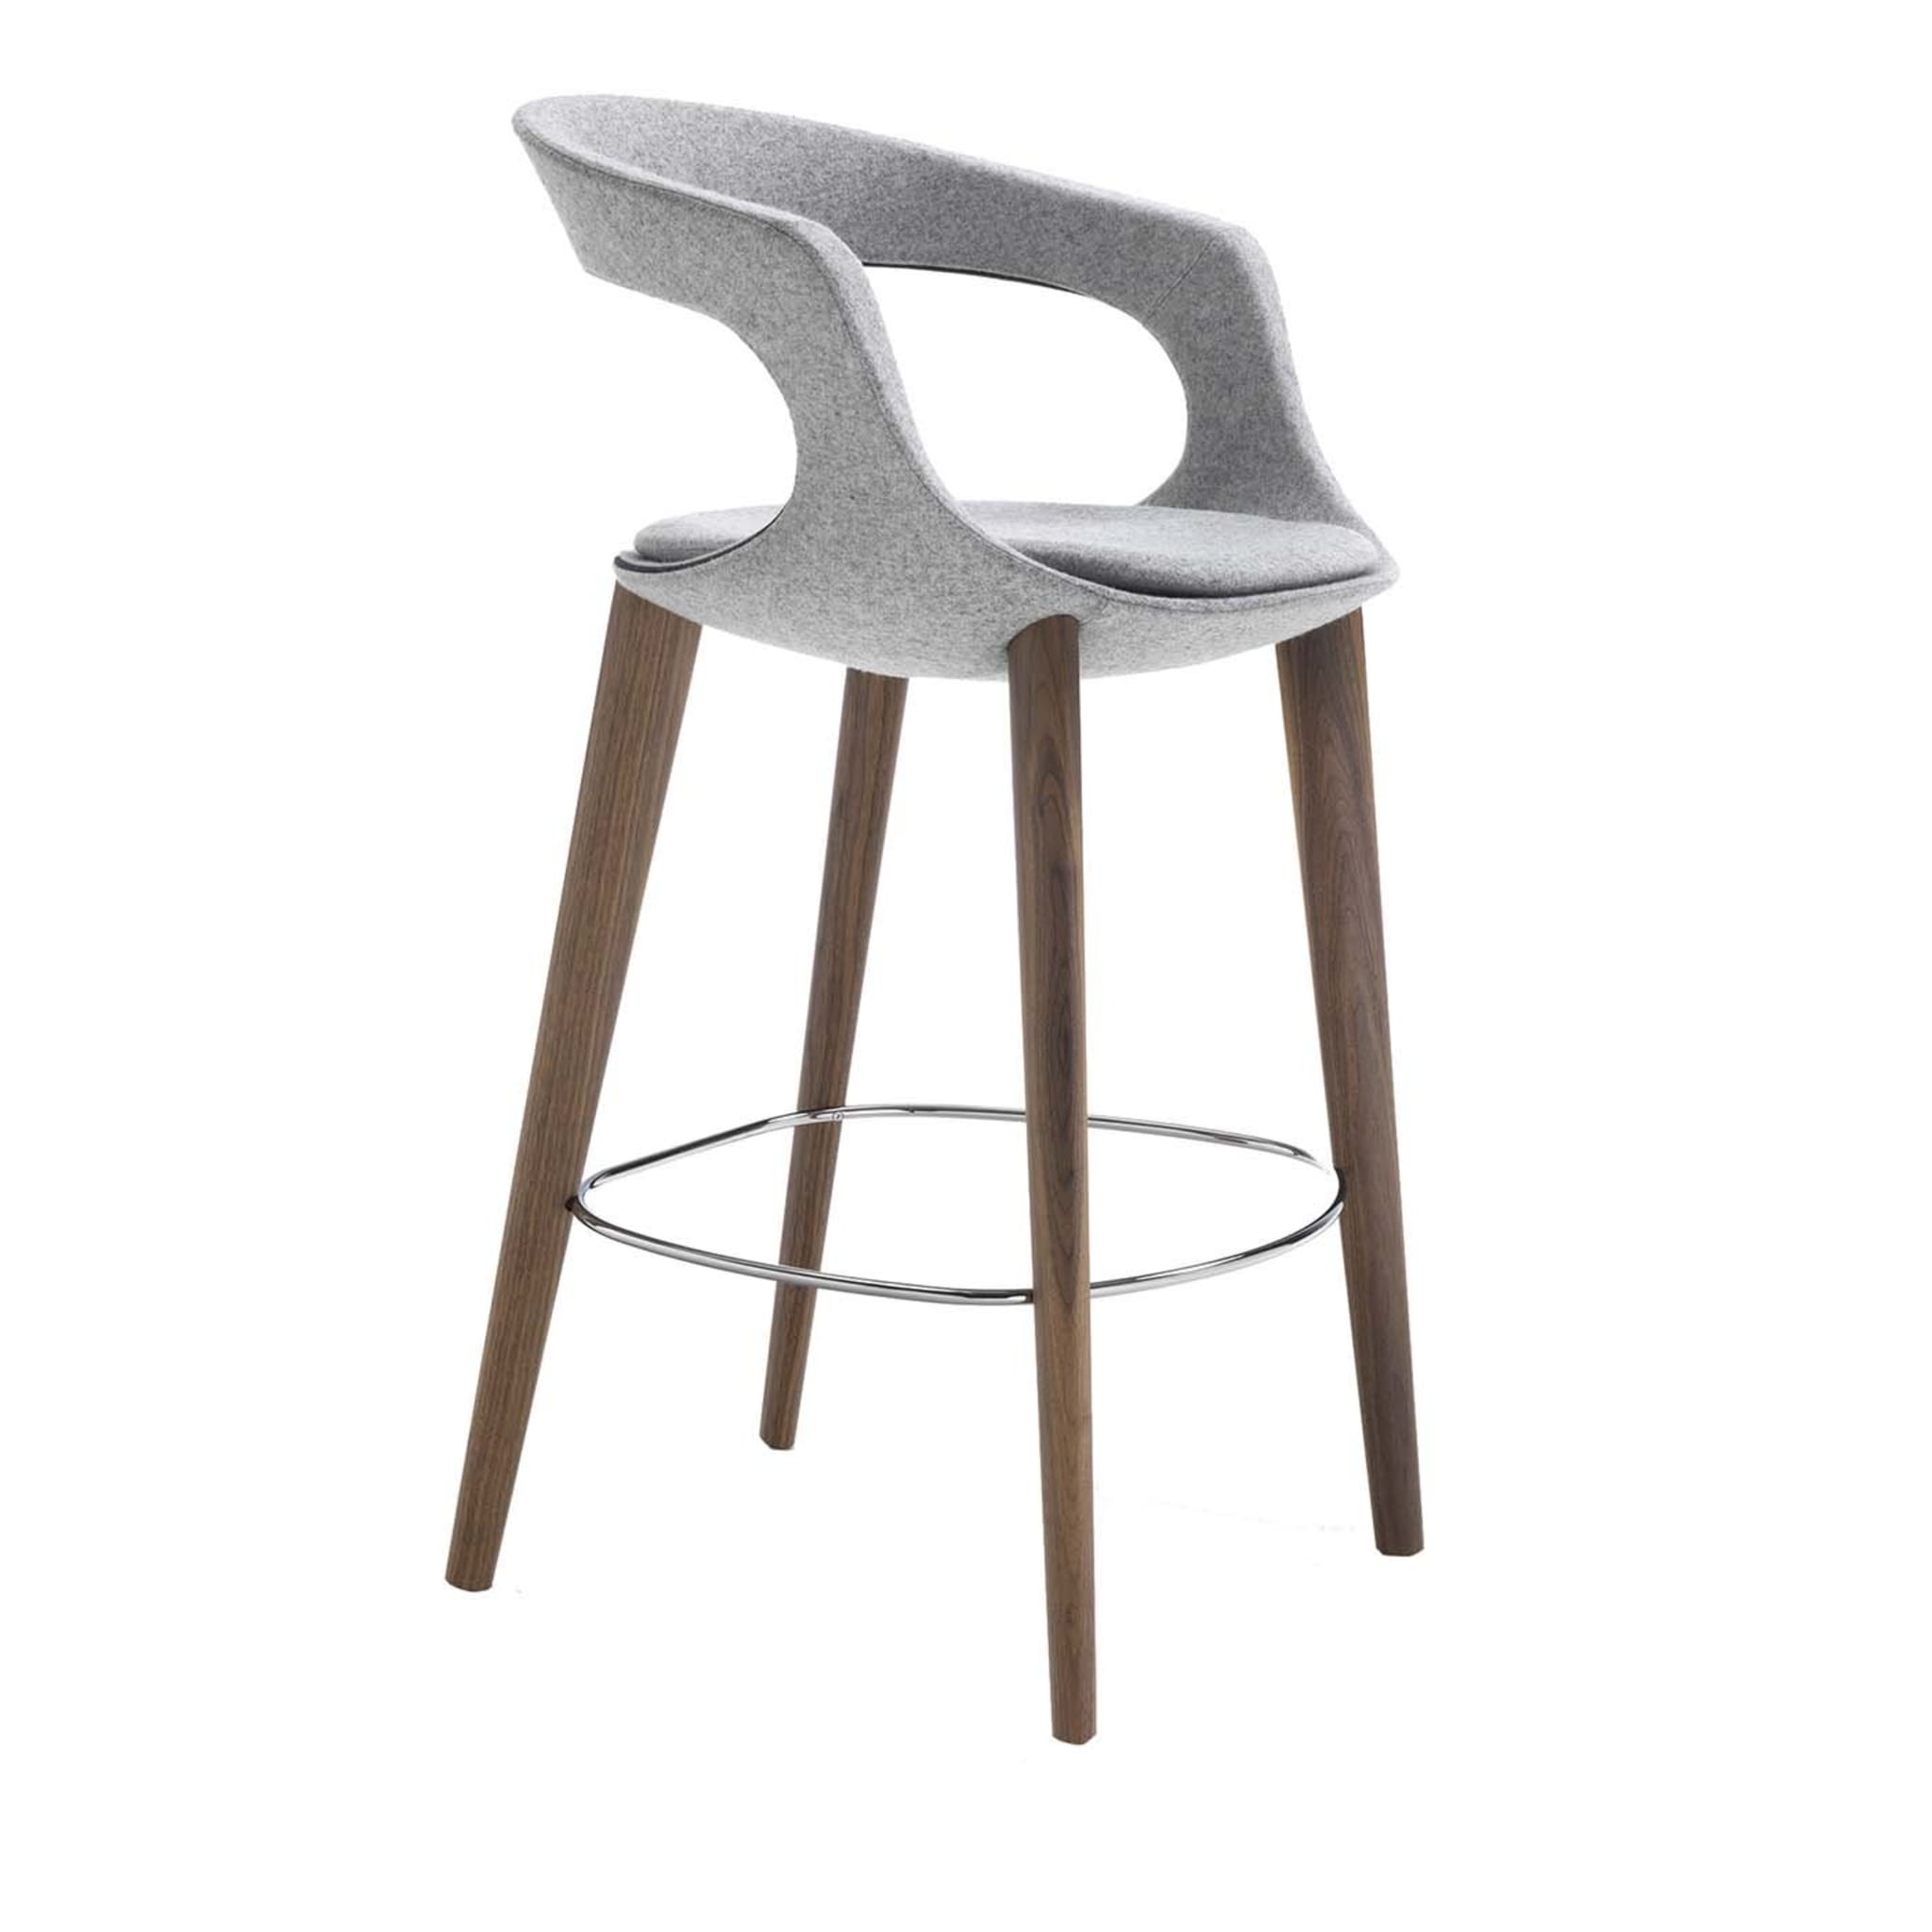 Frenchkiss Low-Back Counter Stool by Stefano Bigi - Main view